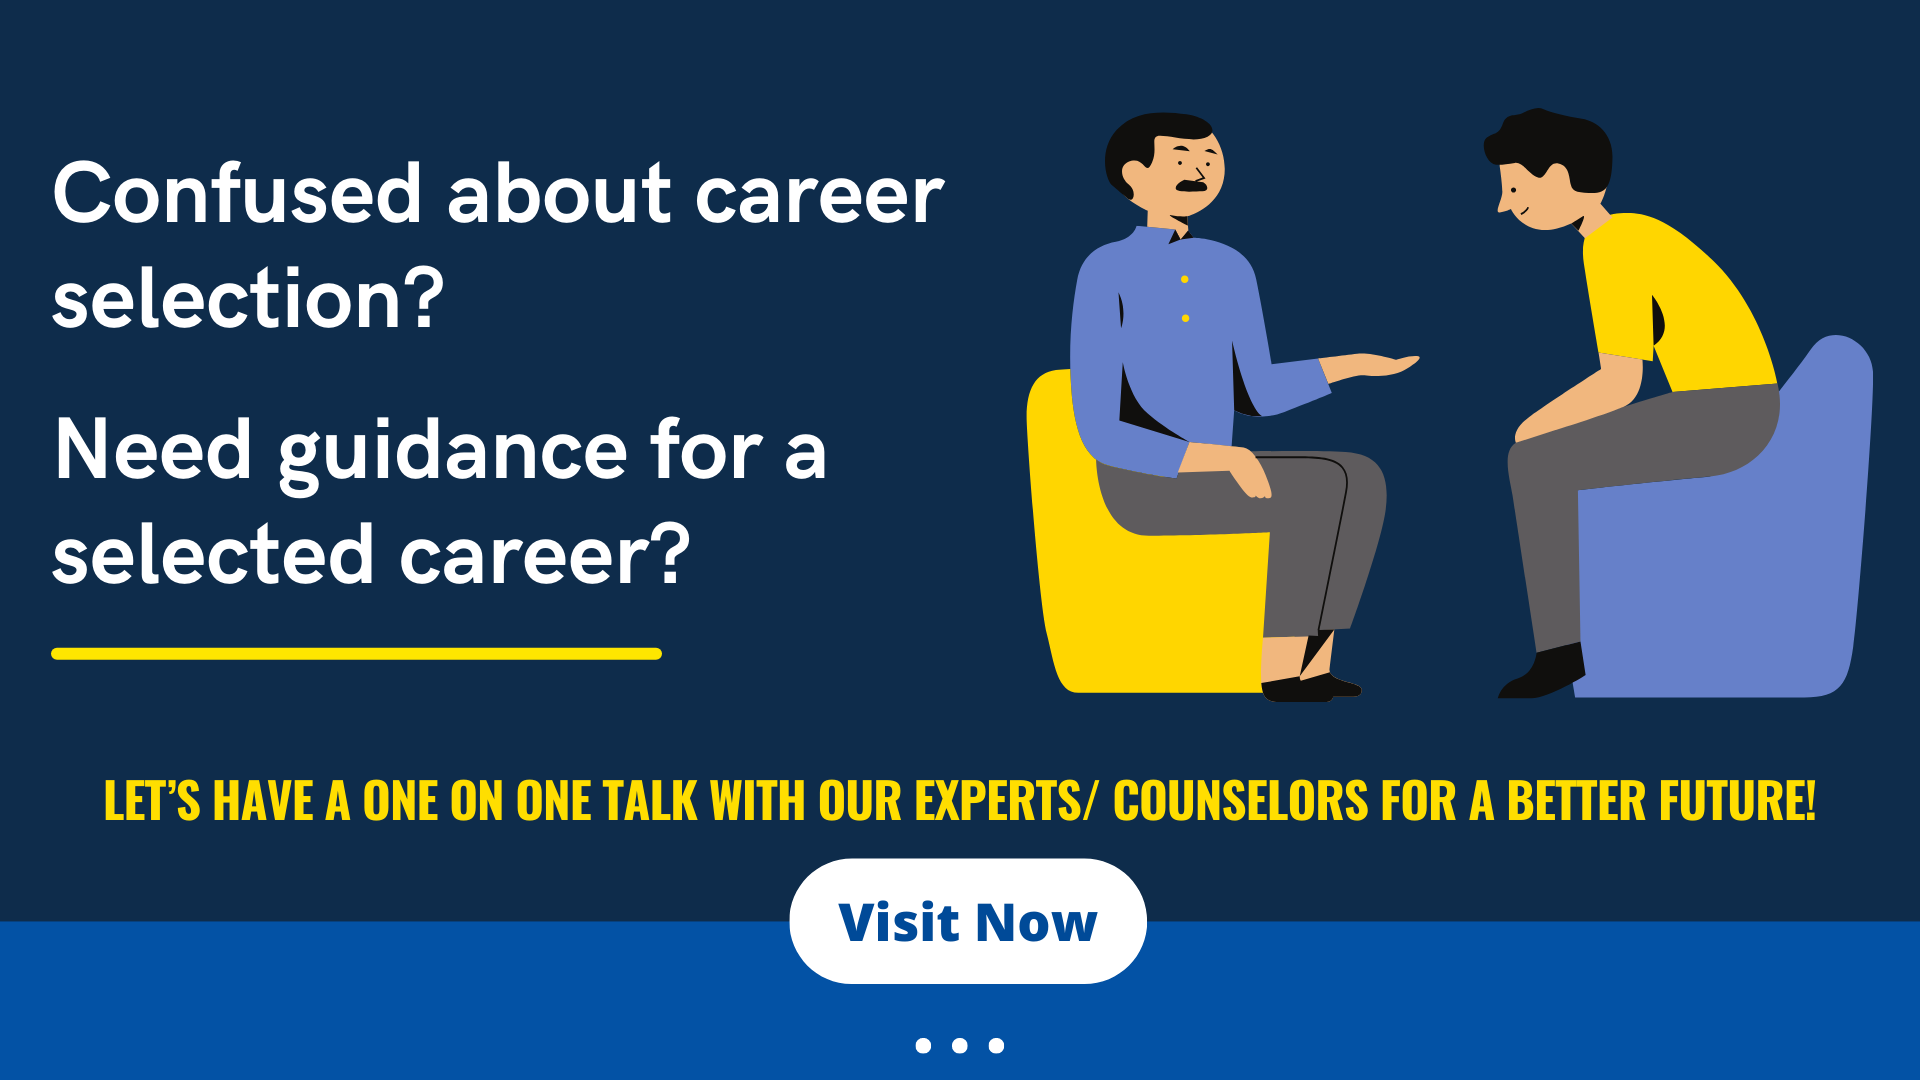 Confused about career selection?